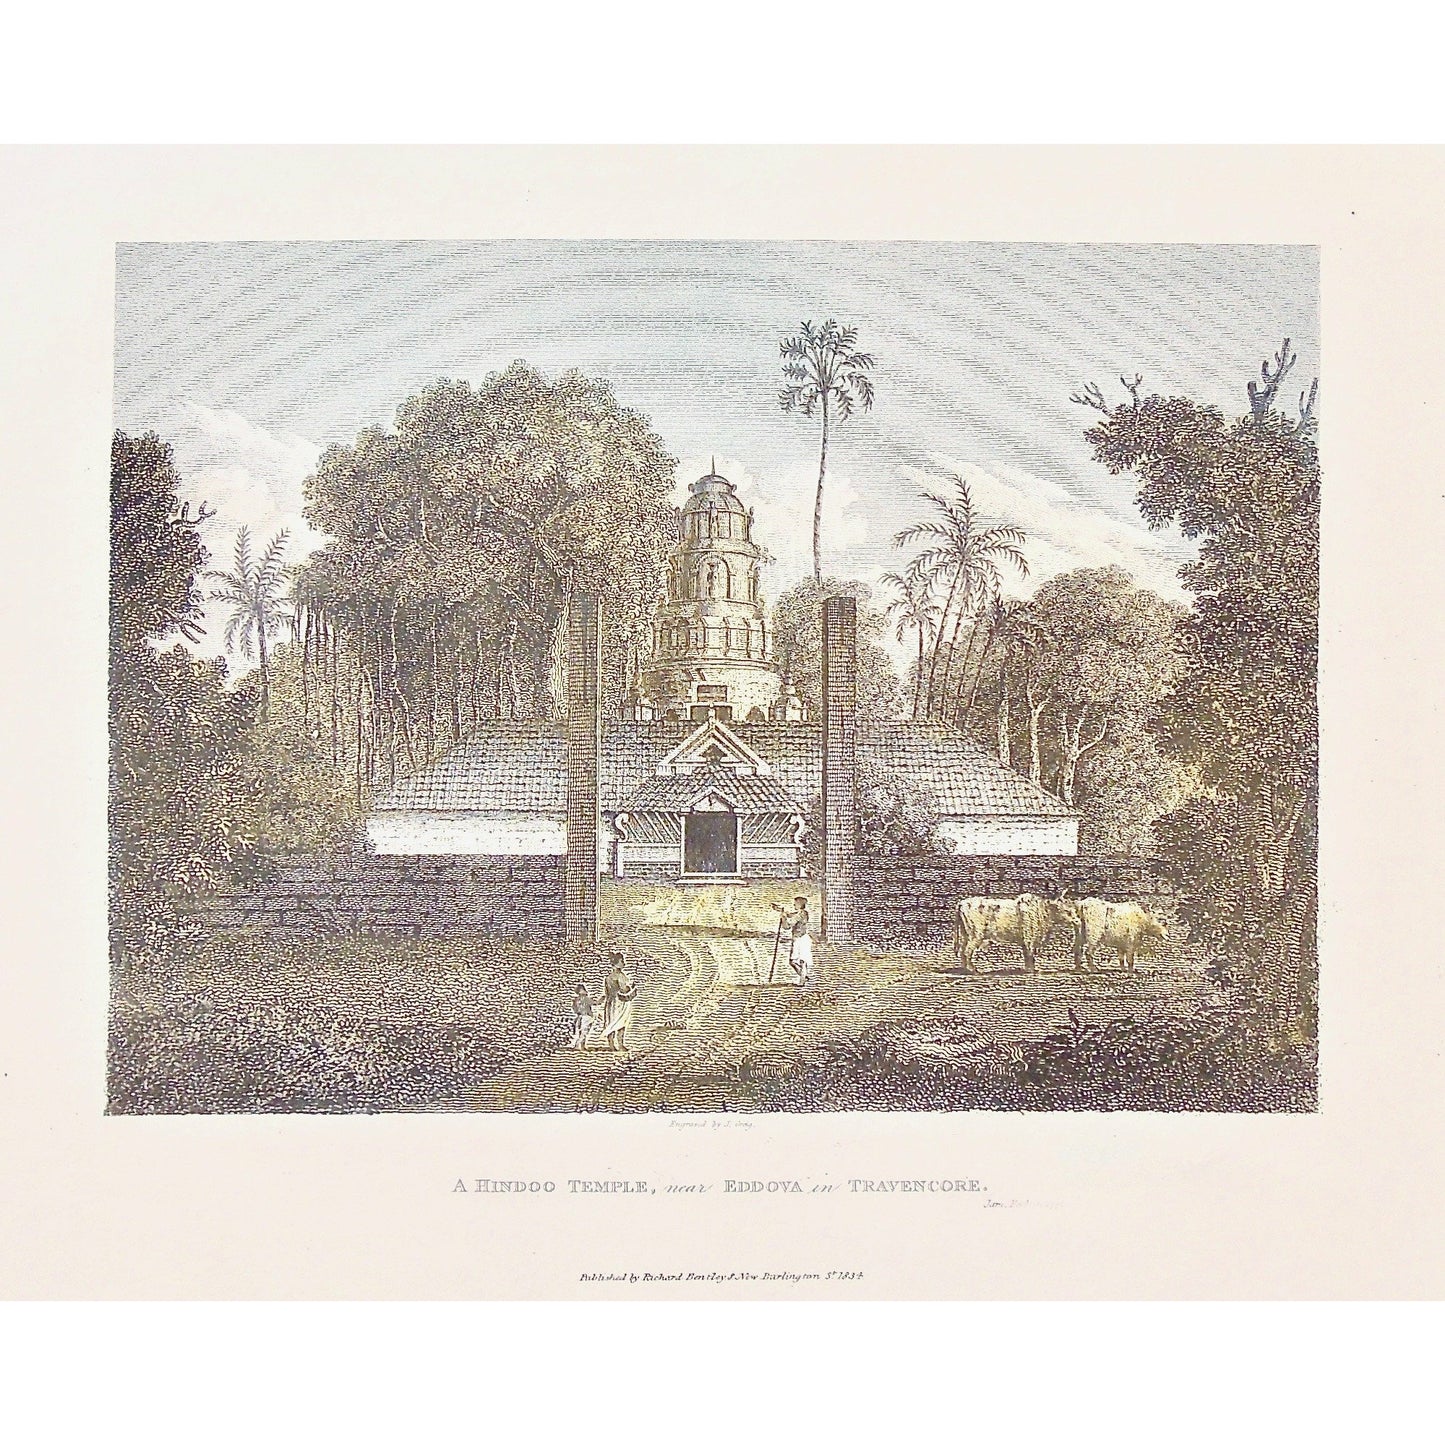 Hindoo Temple, Hindoo, Hindu, Hindu Temple, Temple, Eddova, Travencore, India, Indian, Indian Temple, Indian Architecture, Temple entrance, cattle, sacred cows, James Forbes, Forbes, Eliza Rosée, Countess De Montalembert, Oriental Memoirs, Narrative of Seventeen Years Residence in India, Bentley, 8 New Burlington Street, London, Greig, Nichols & Son, 25 Parliament Street, 1772, 1834, Antique Print, Antique, Prints, Vintage Prints, Vintage, Collector, Collectable, Original, Unique, Rare Map, Rare, Rare book